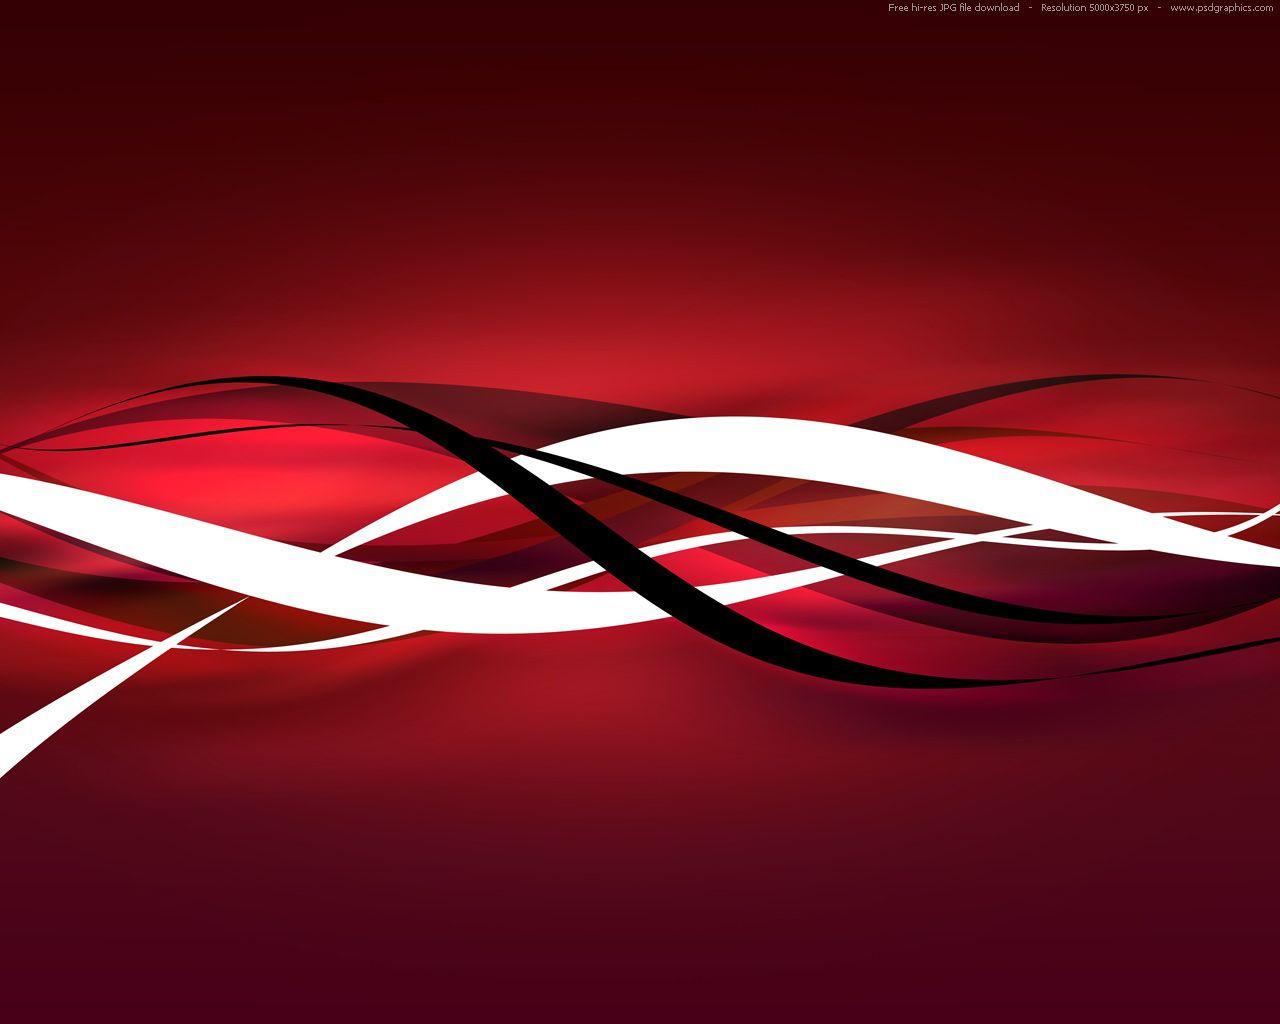 Dark red abstract backgrounds